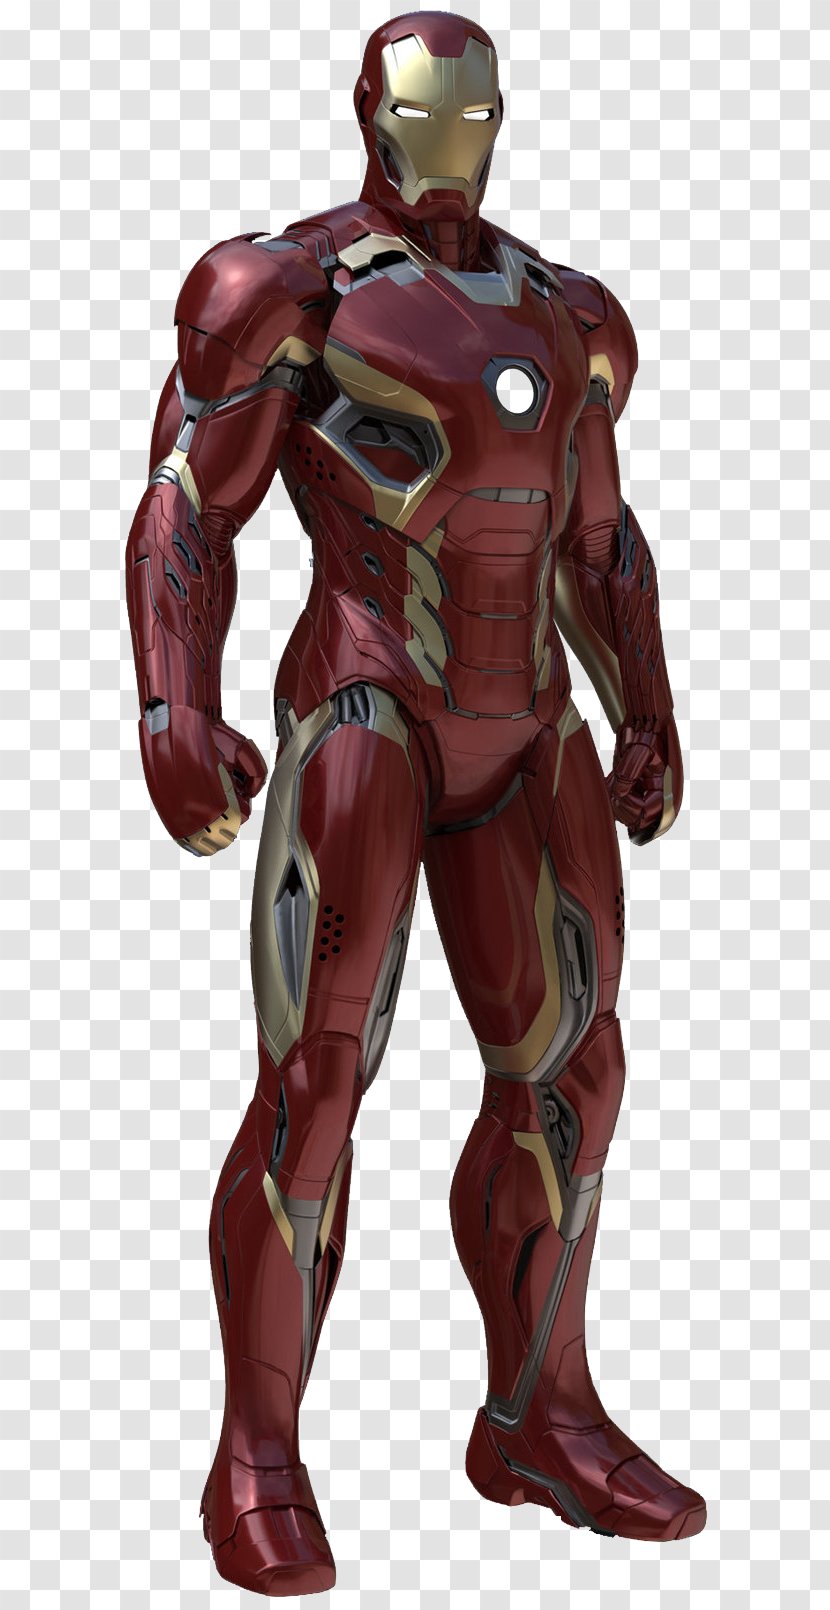 Iron Man Edwin Jarvis Howard Stark Extremis Vision - Muscle - Model Transparent PNG